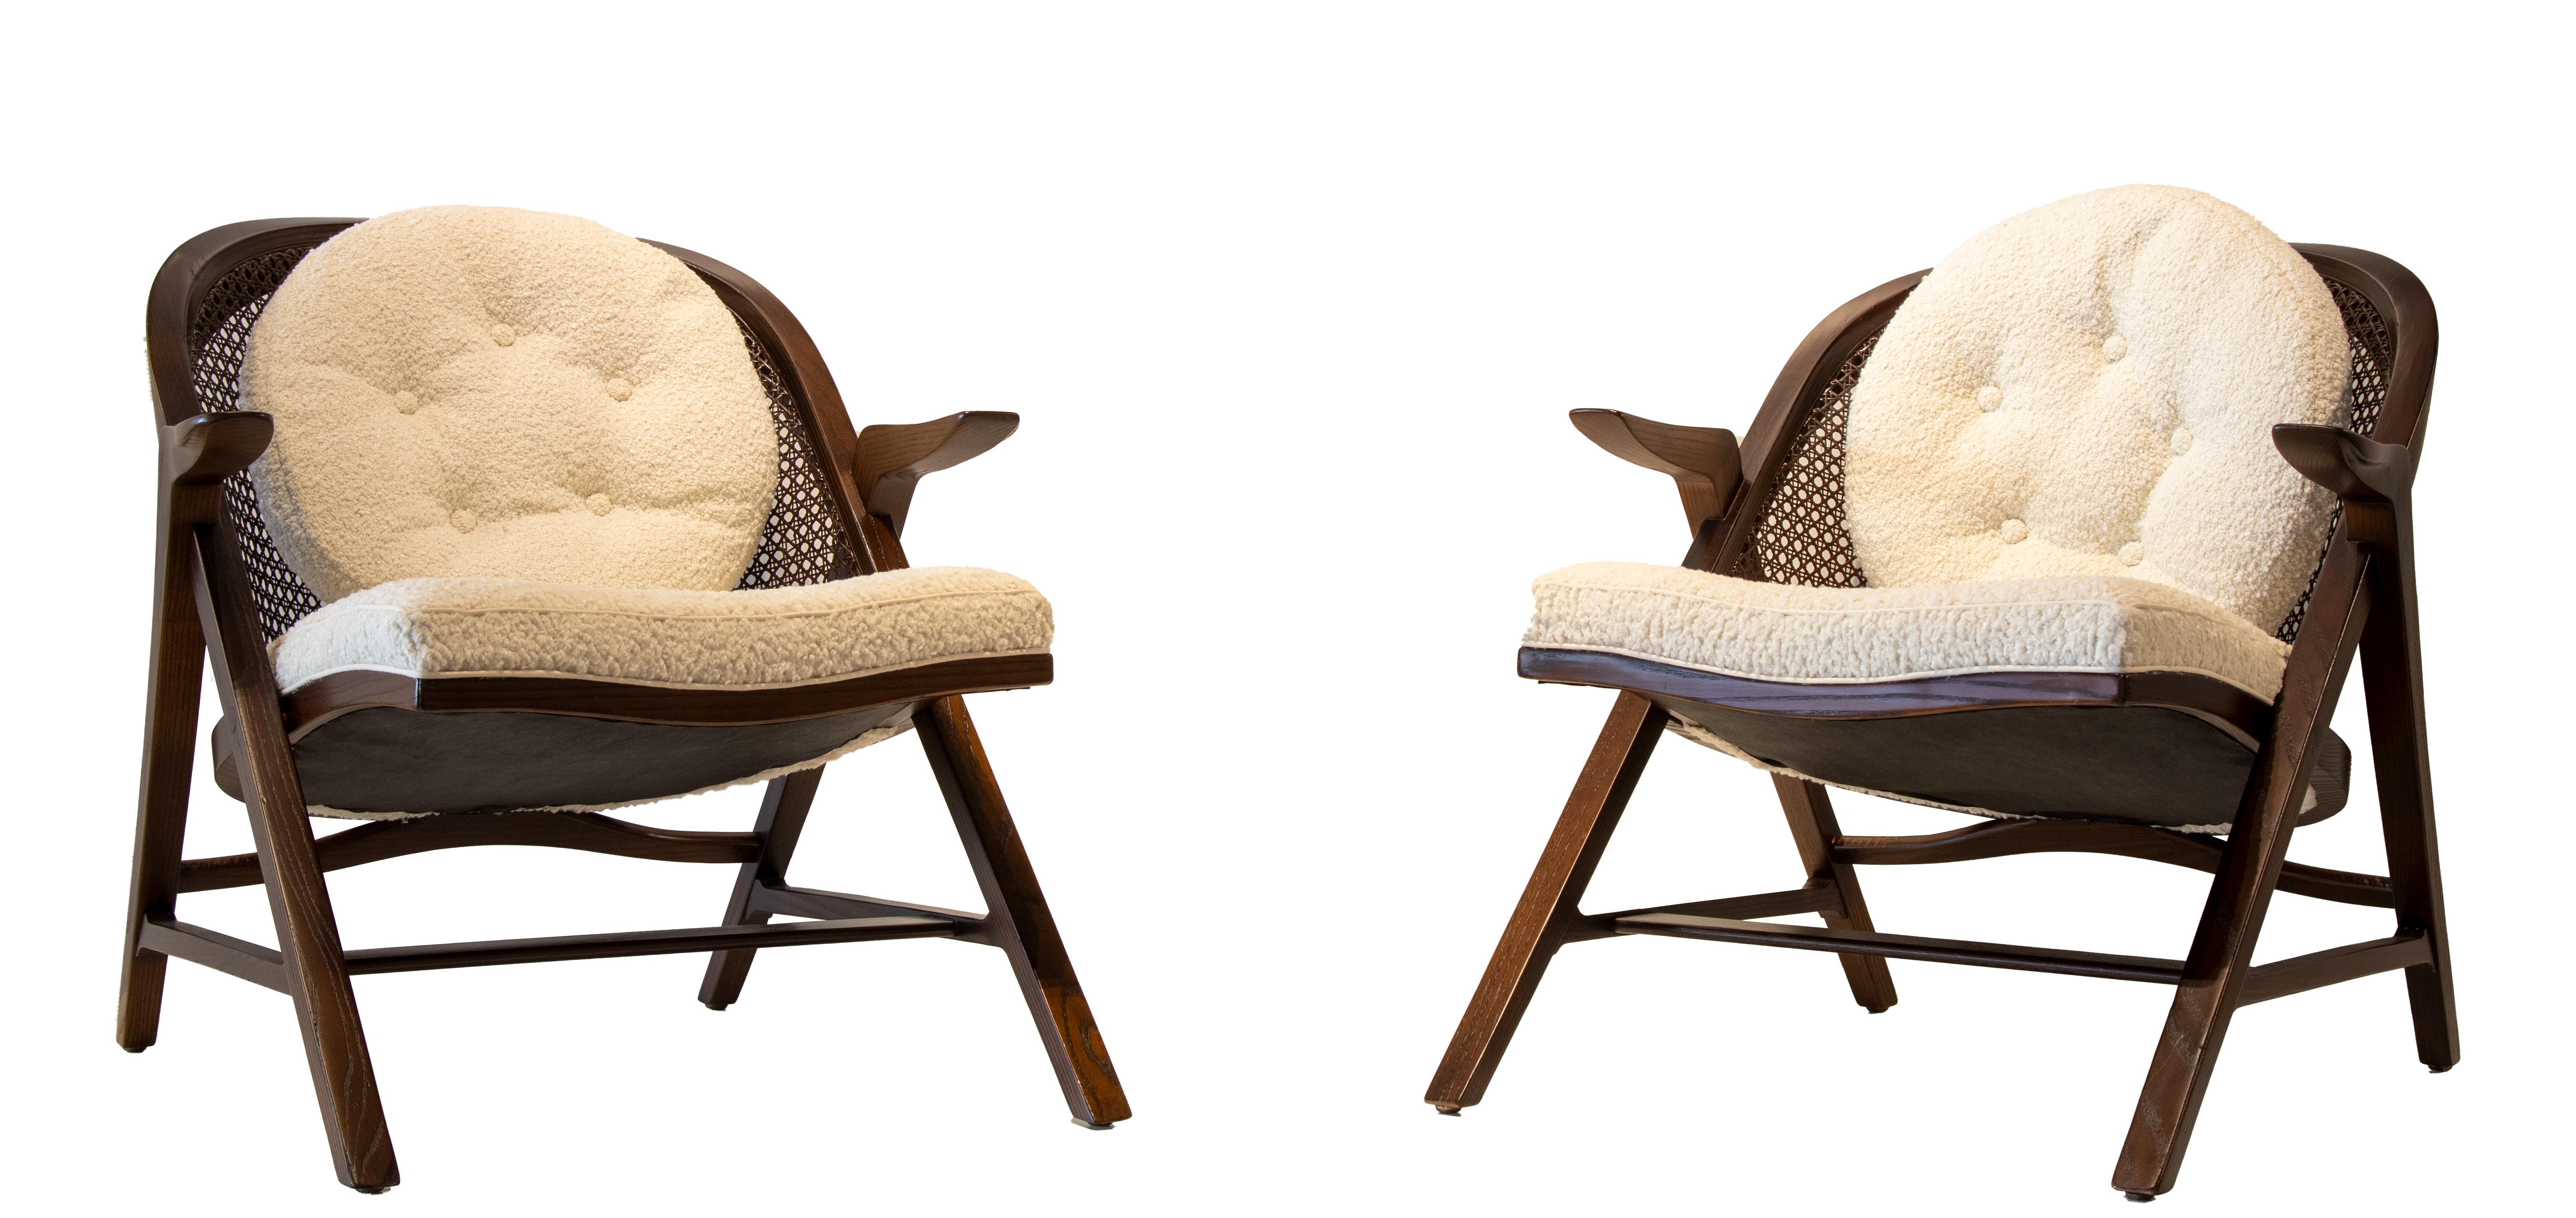 Mid-20th Century Pair of 1950s Edward Wormley for Dunbar Cane Back Chairs Model 5700a